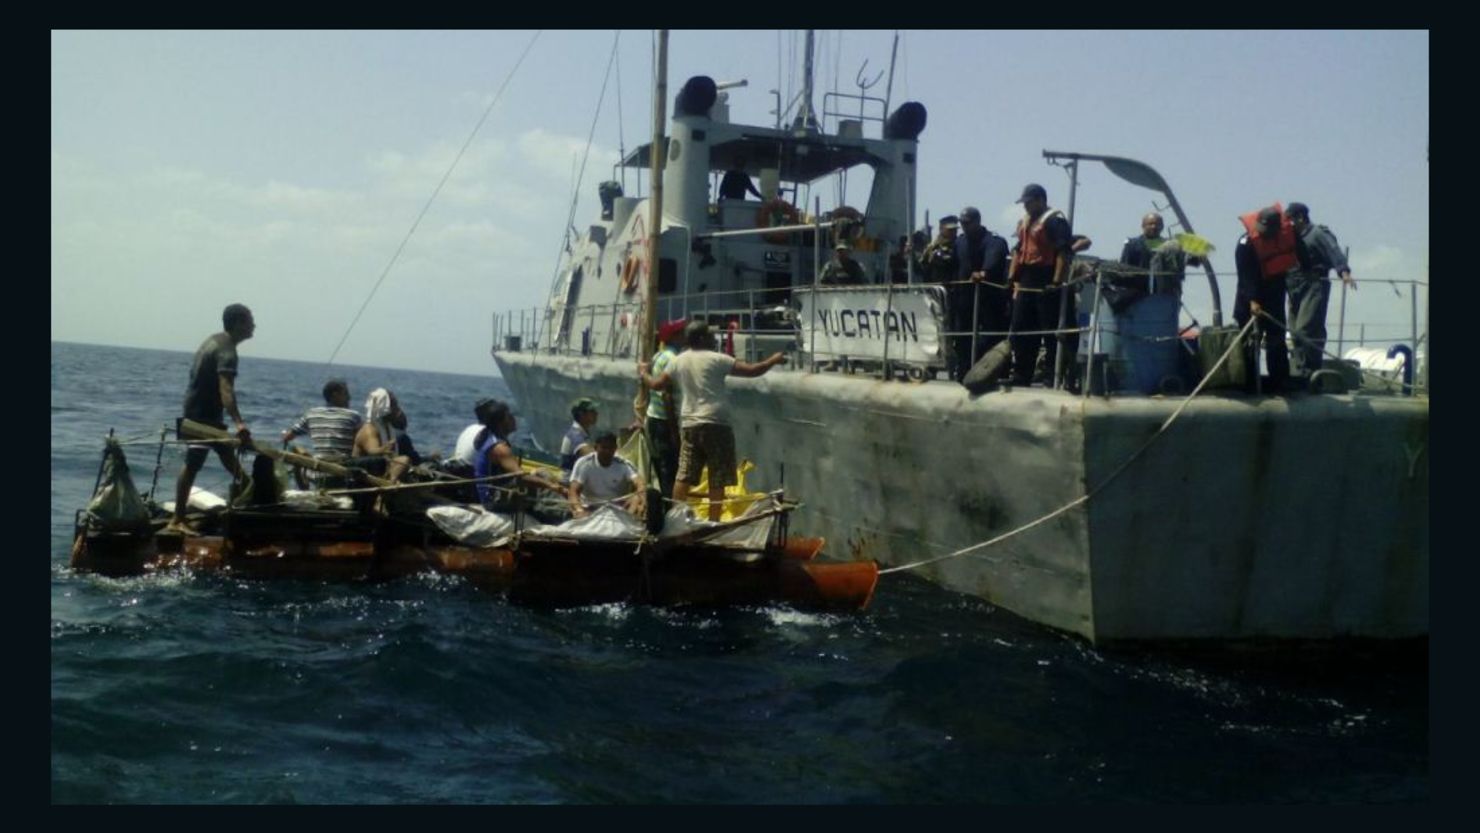 Mexican authorities say they rescued rafts packed with Cuban migrants off the Yucatan Peninsula Sunday.